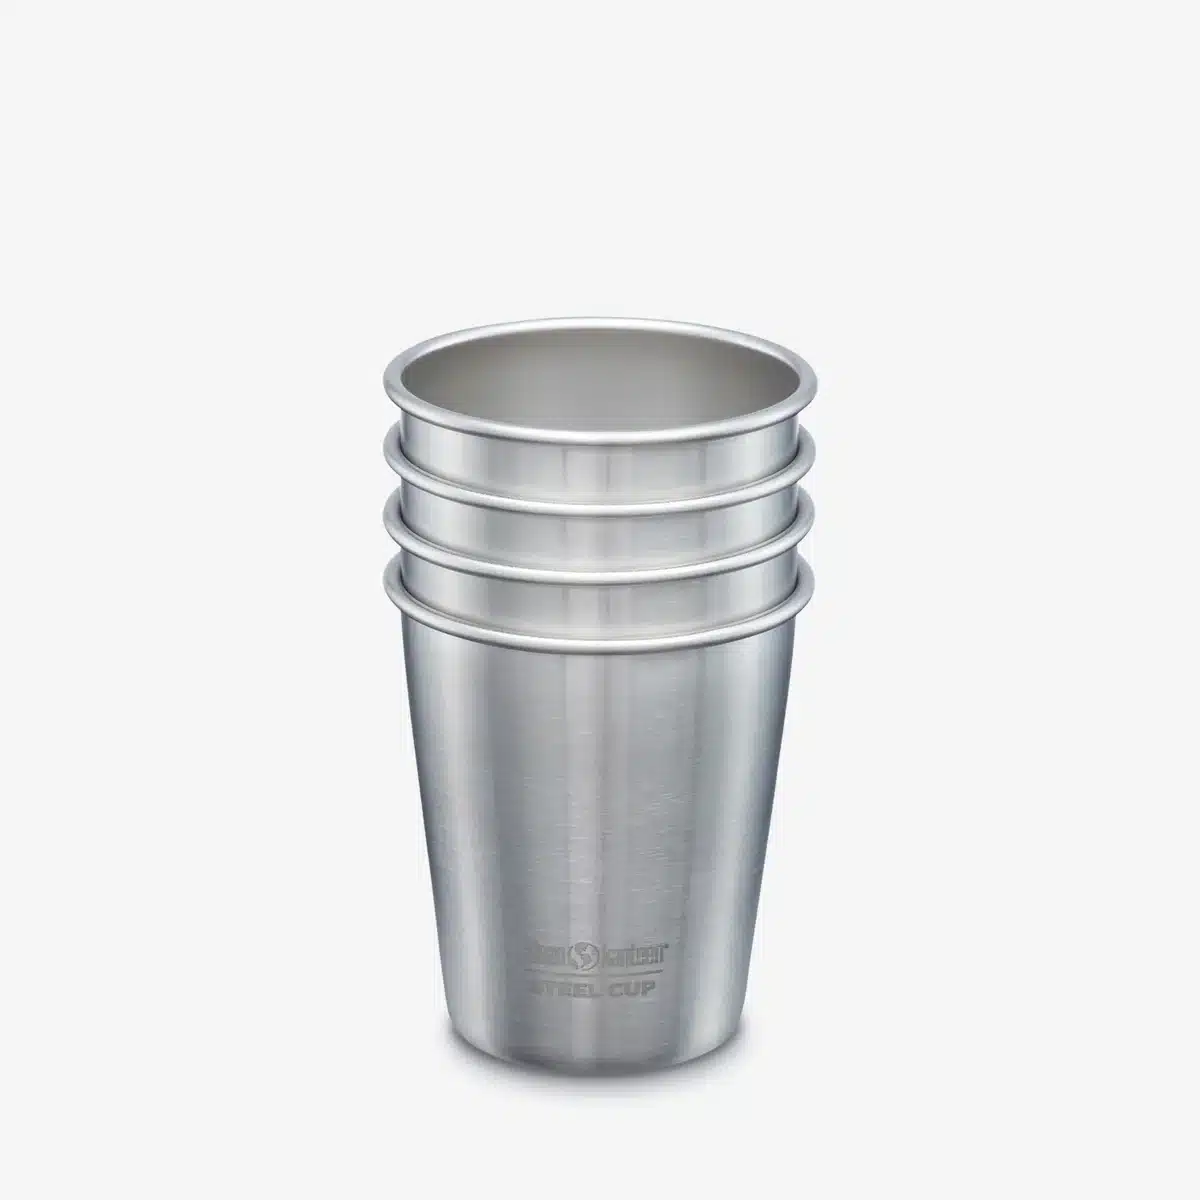 Klean Kanteen 10 oz cups 4 pack from Gimme the Good Stuff